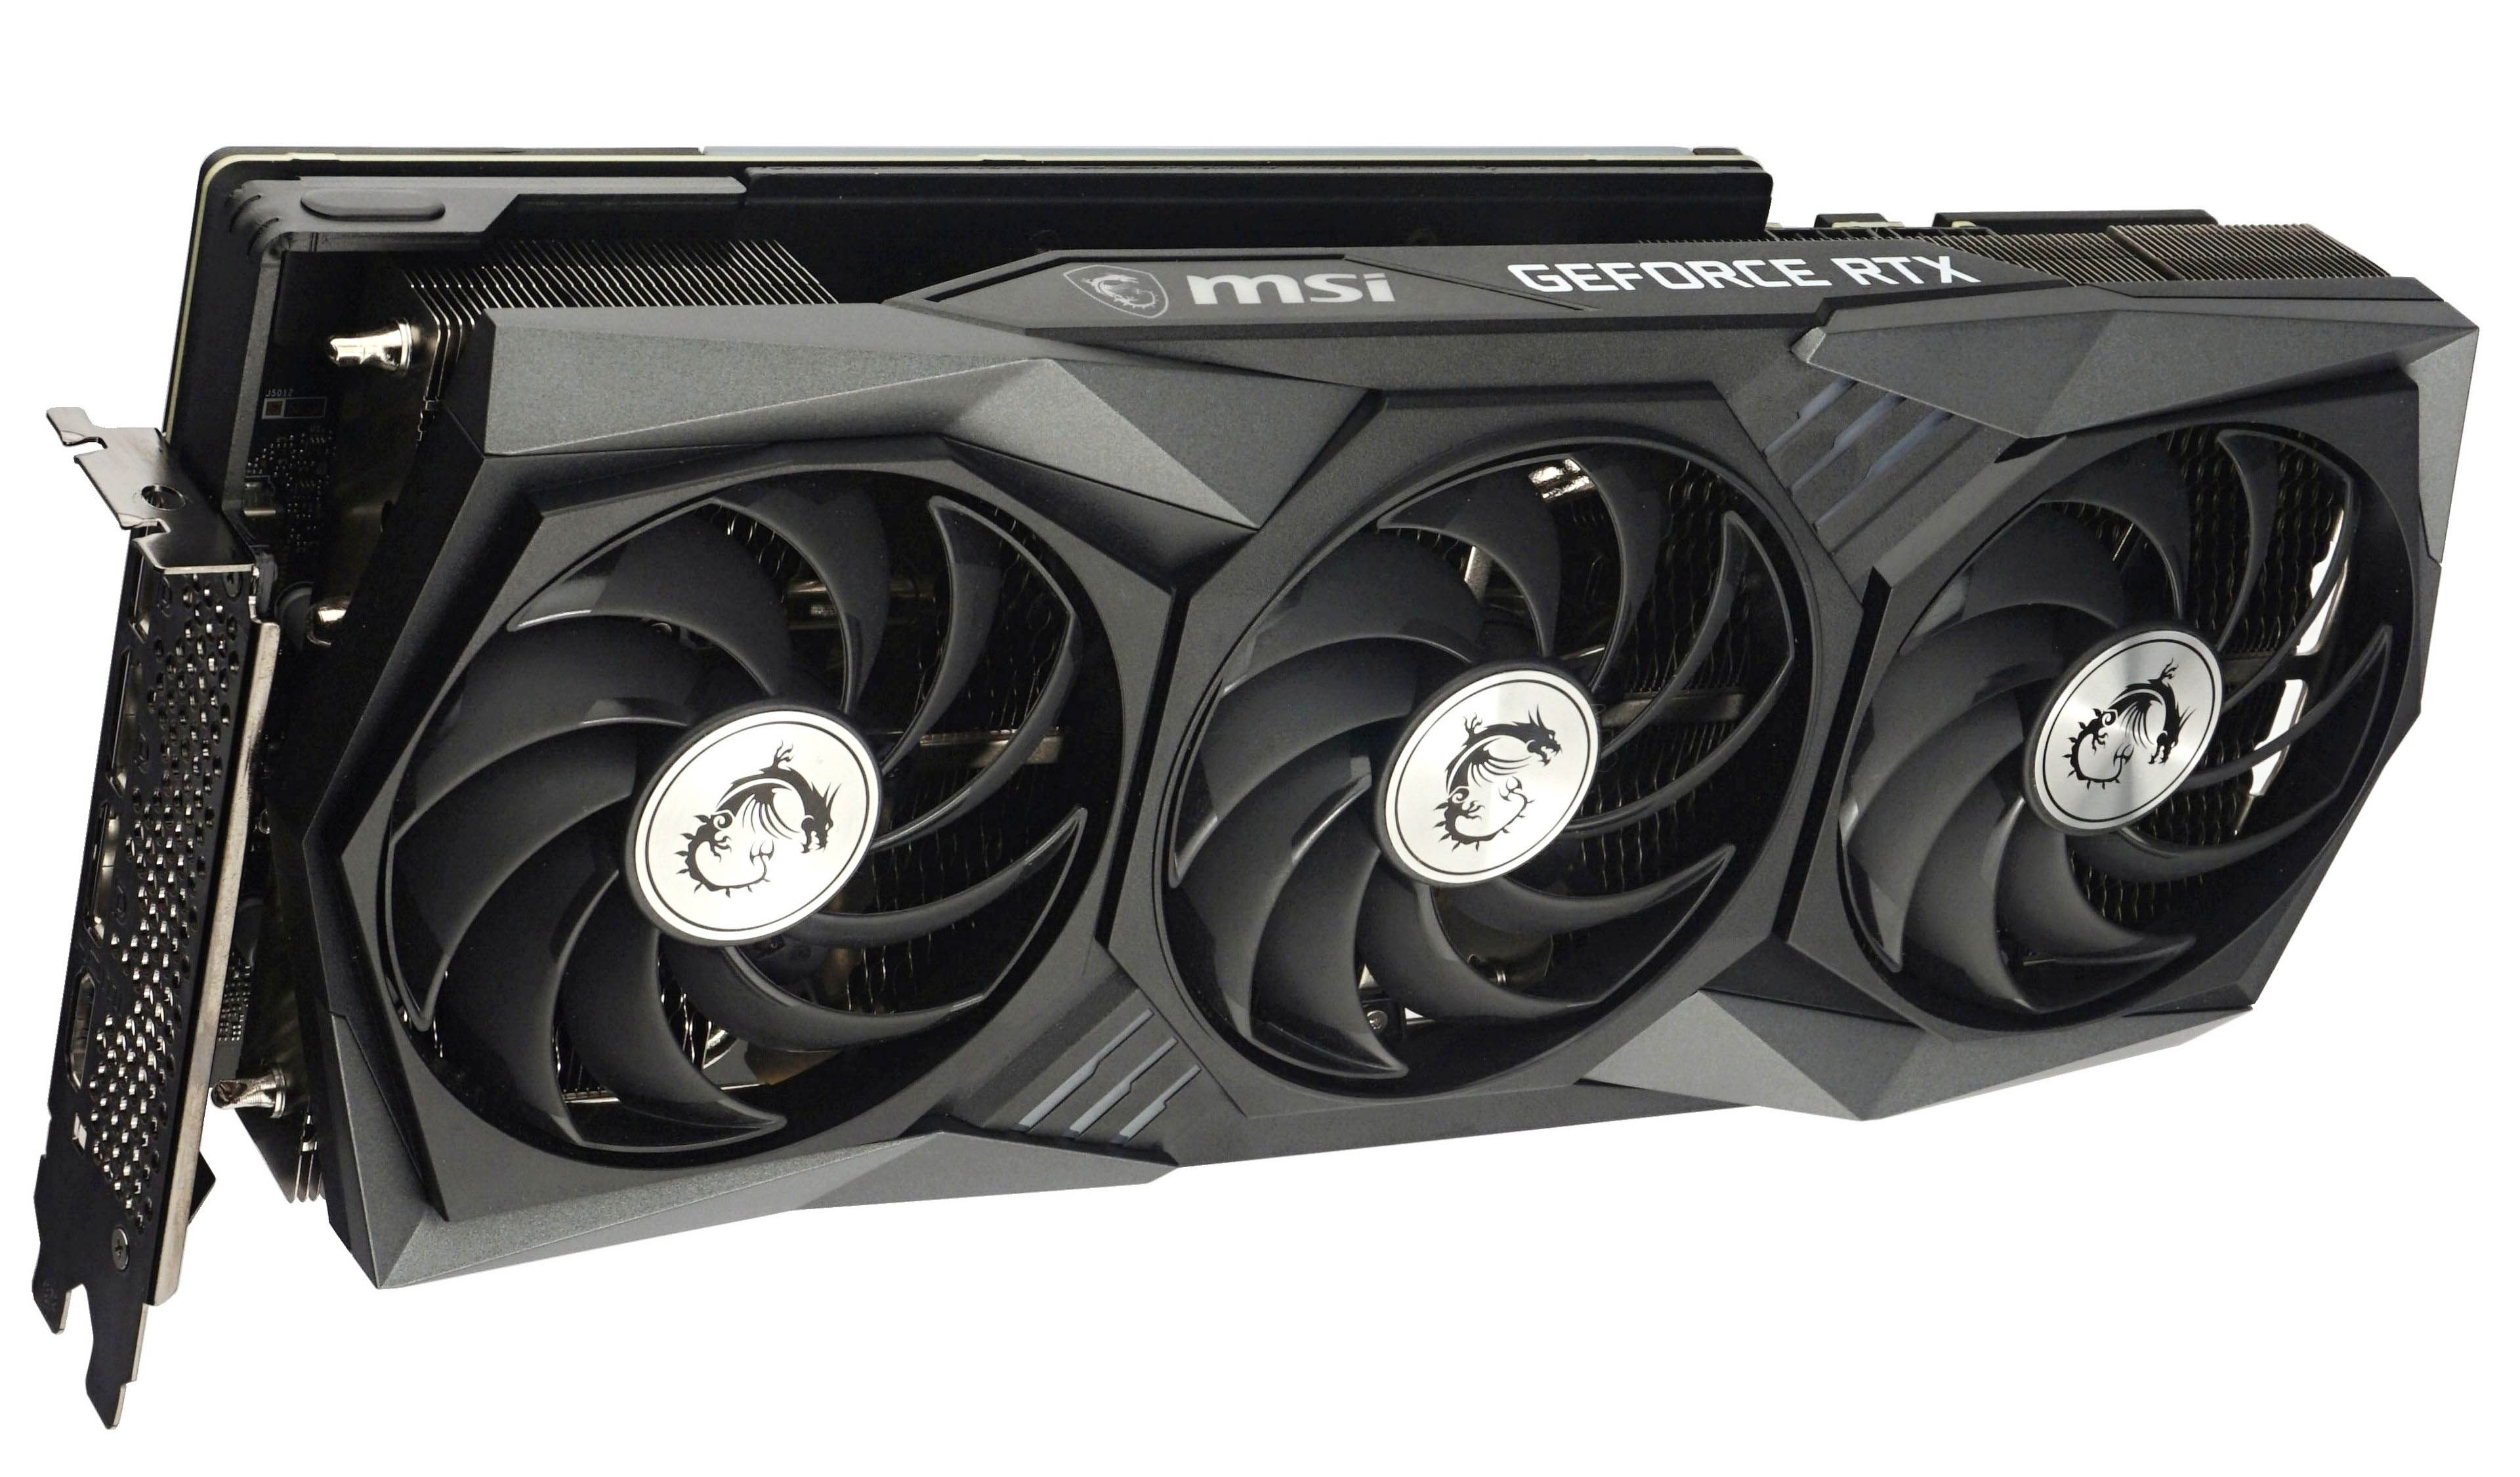 MSI RTX 3060 Ti Gaming X Trio: mid-class with a high-end cooler